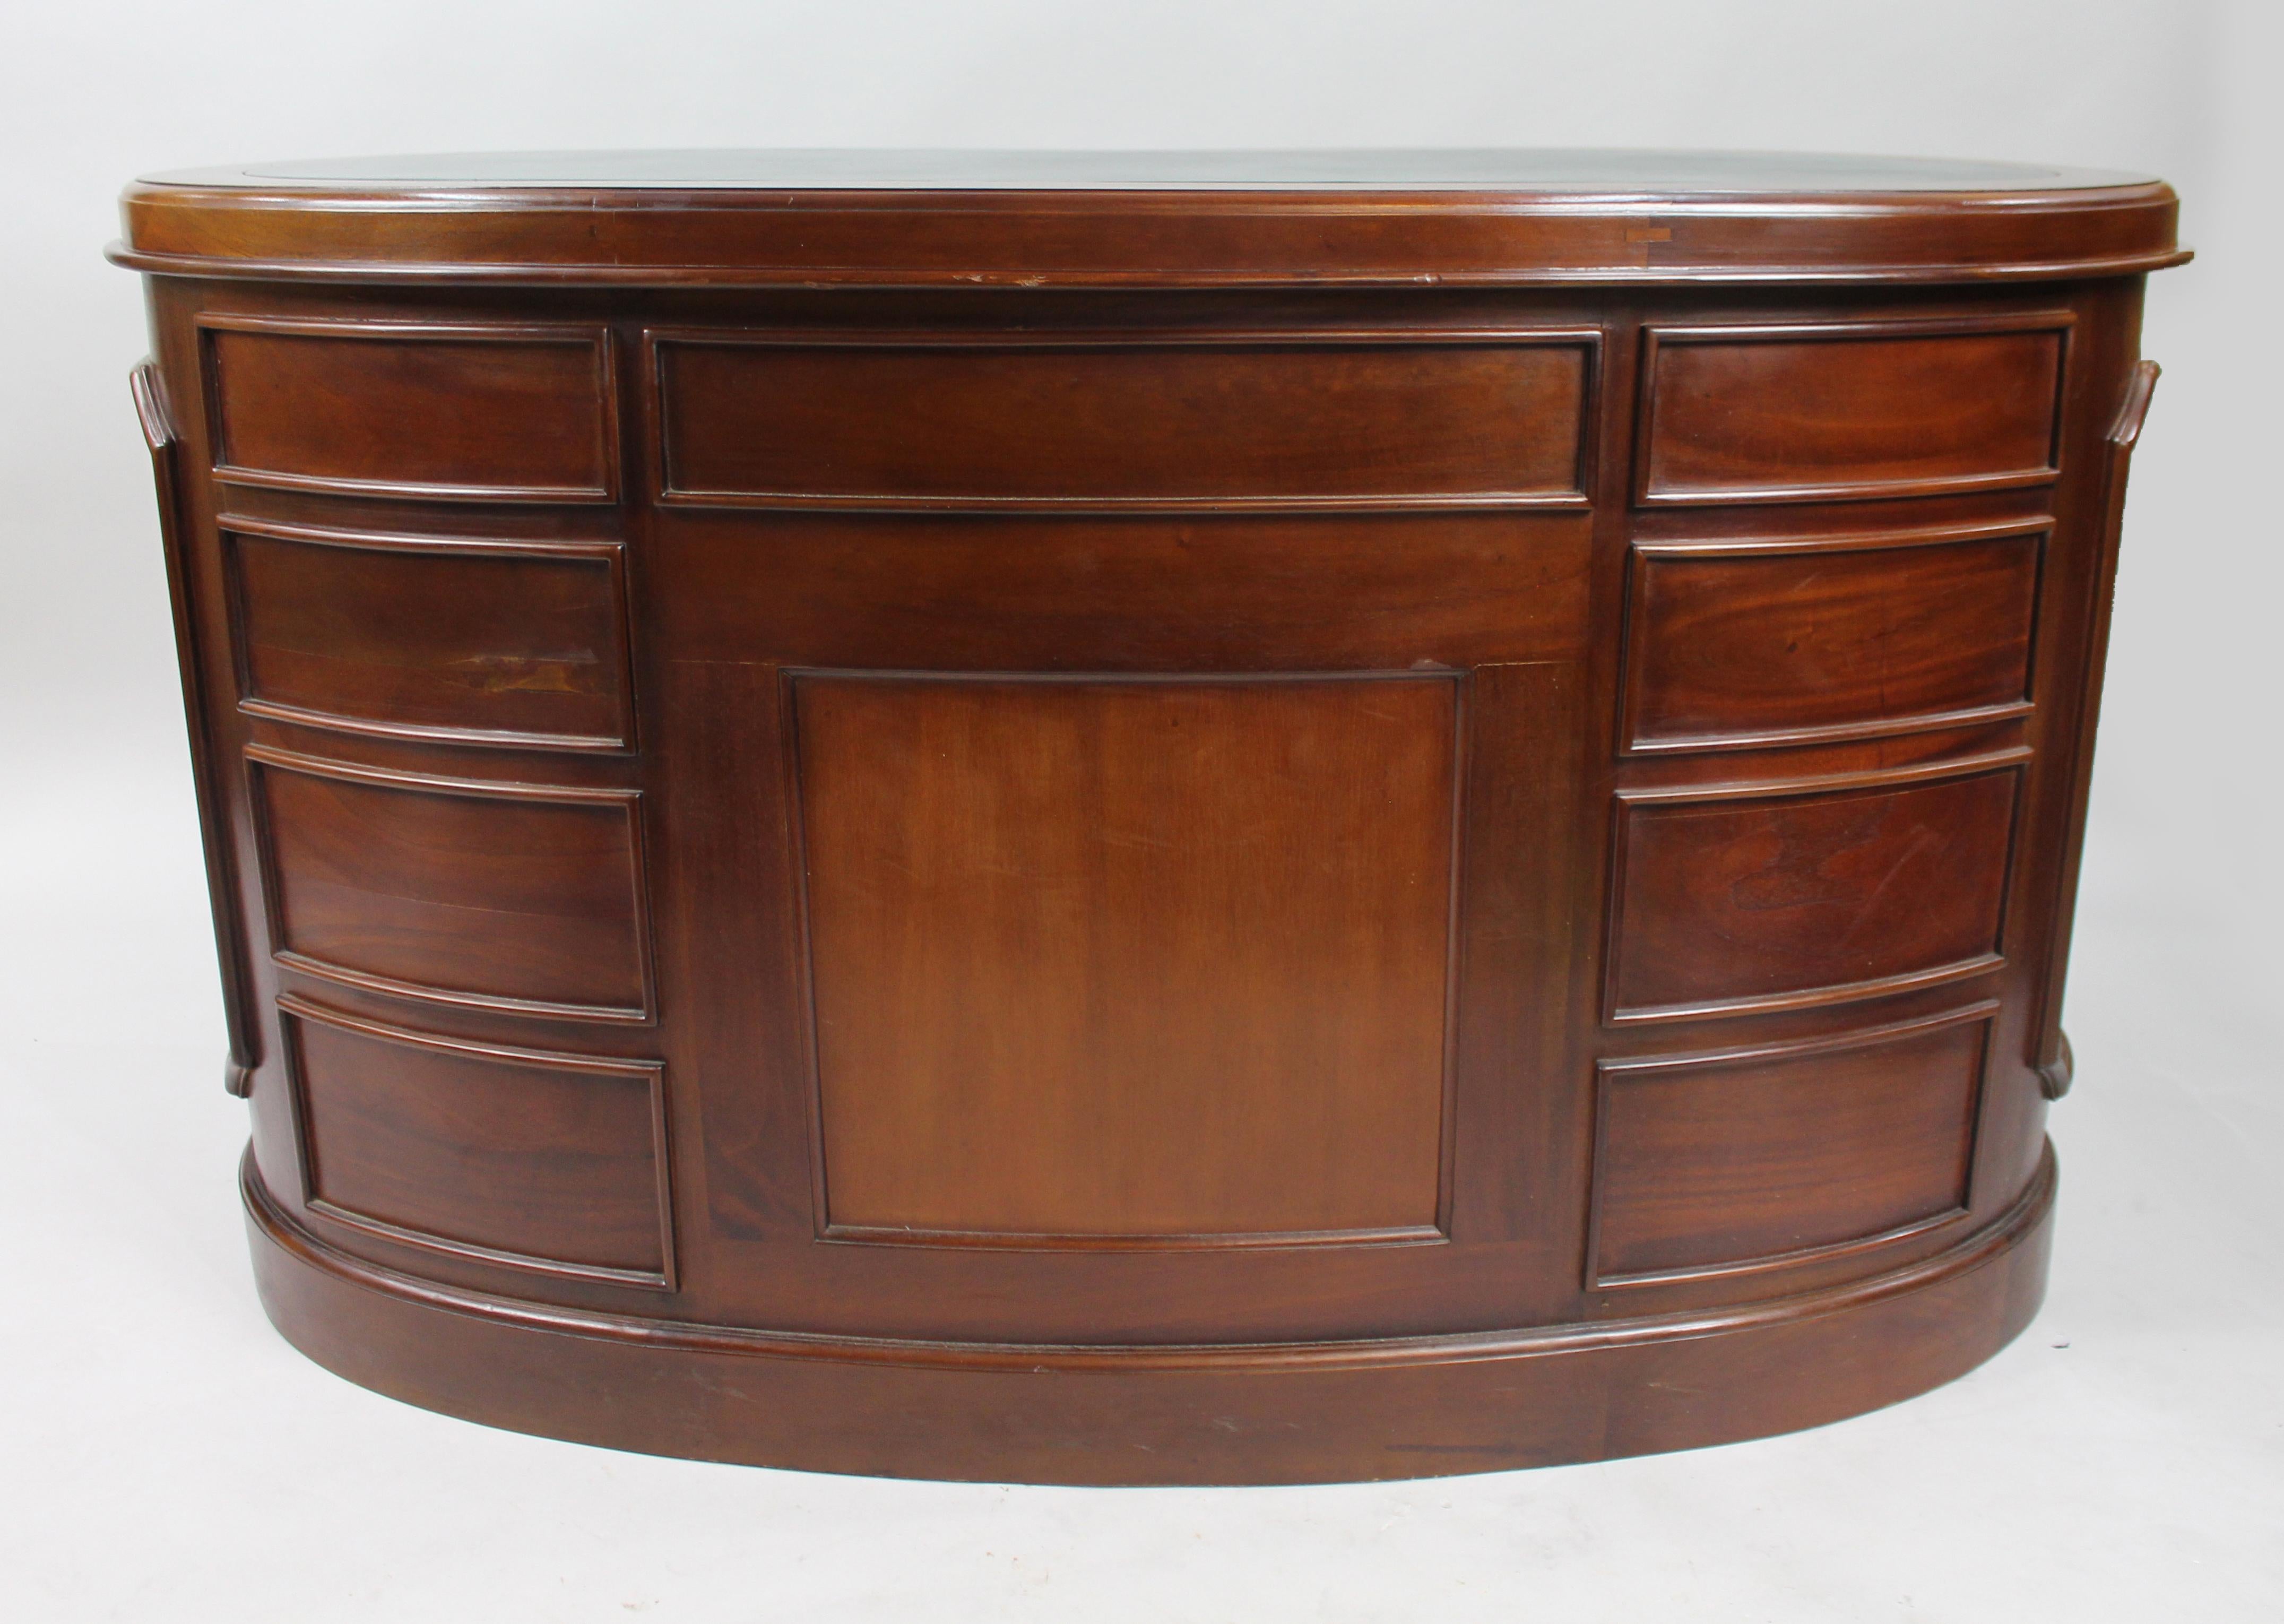 Contemporary Kidney Shaped Mahogany Leather Topped Desk For Sale